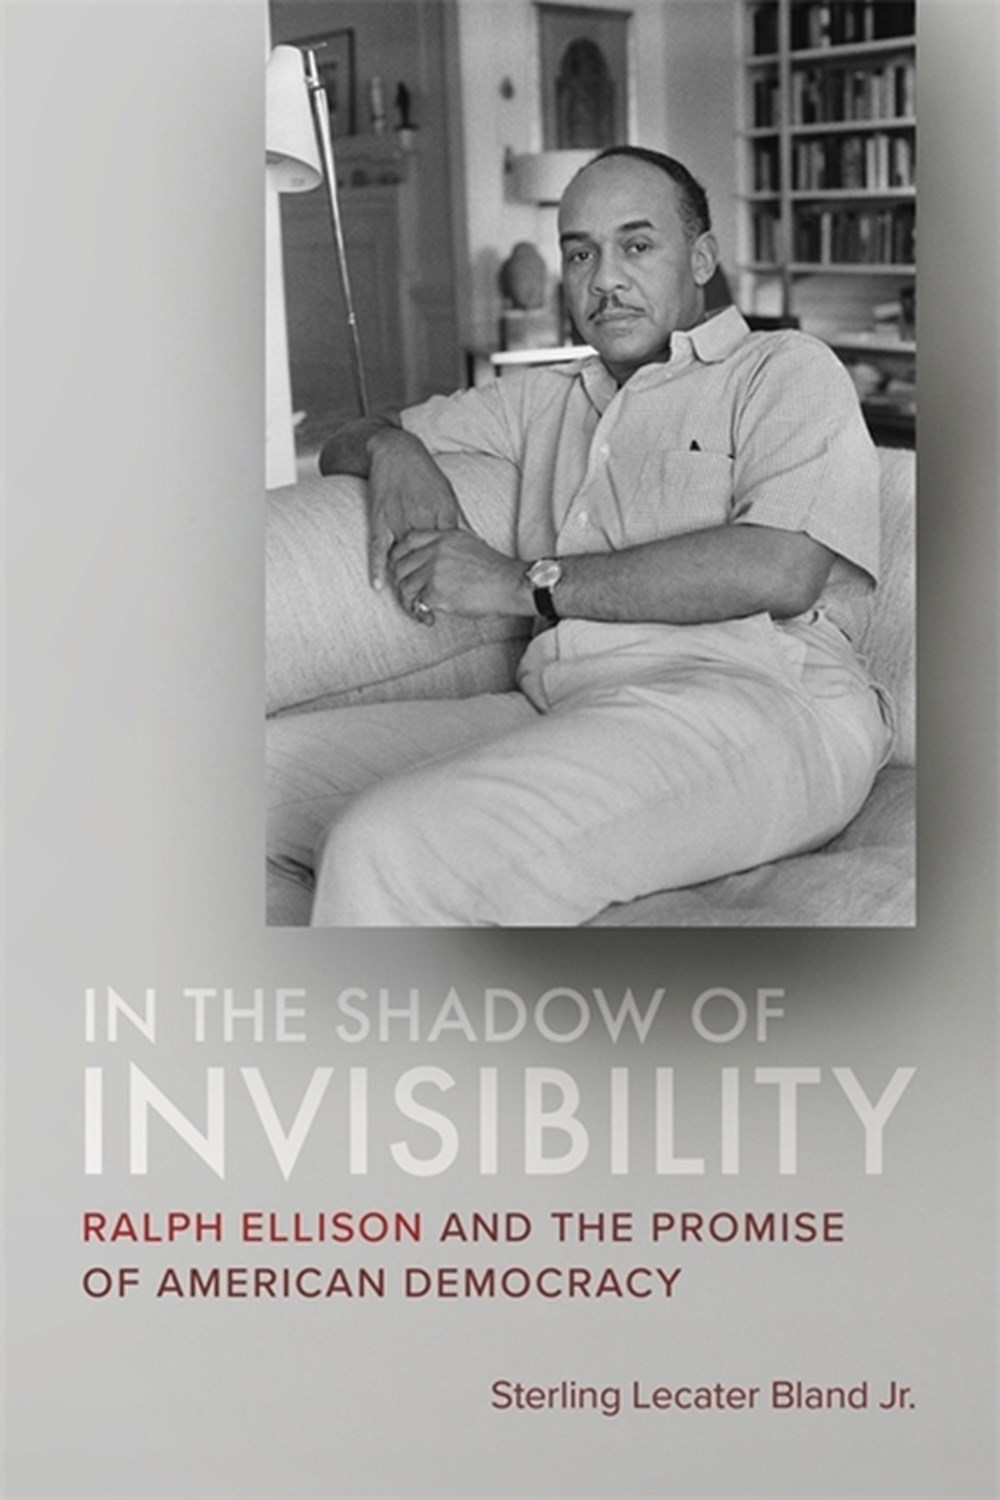 In the Shadow of Invisibility: Ralph Ellison and the Promise of American Democracy